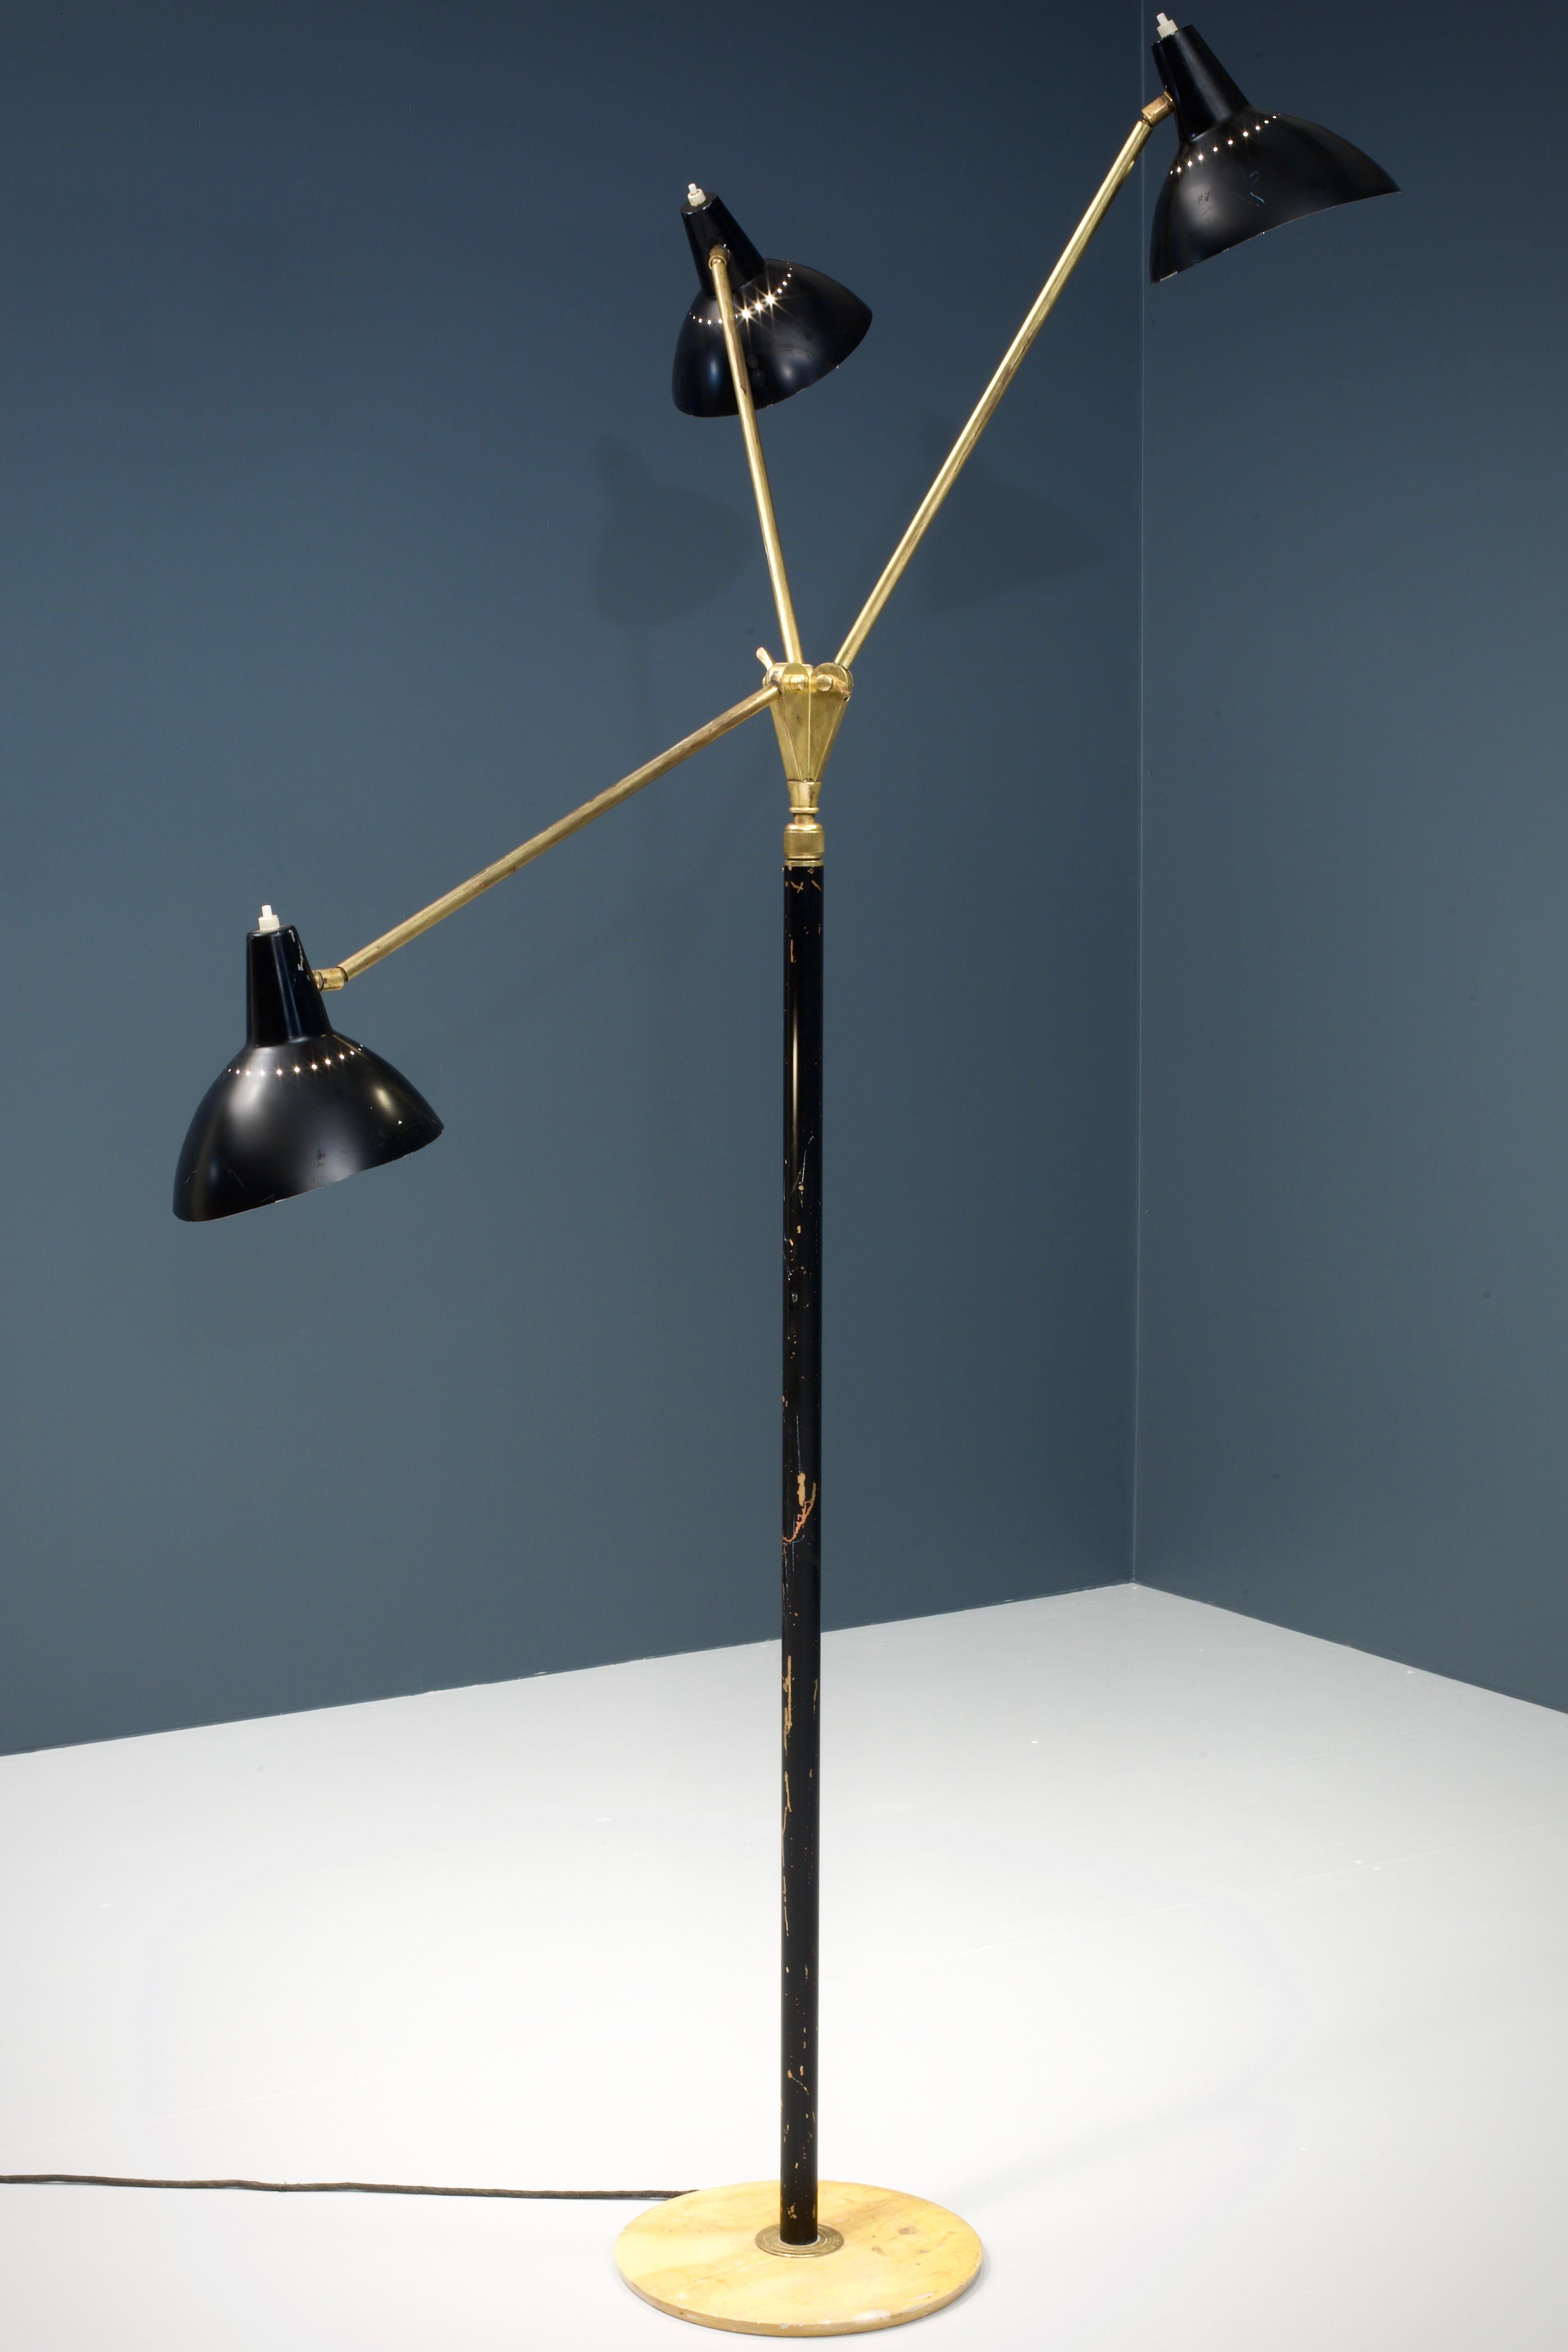 Italian floorlamp by Stilnovo in brass, metal and marble, Italy, 1950s.

Classic yet playful Stillnovo floorlamp with three adjustable arms. A quite practical lamp because of the moving arms and the shades that can be turned separately to get your